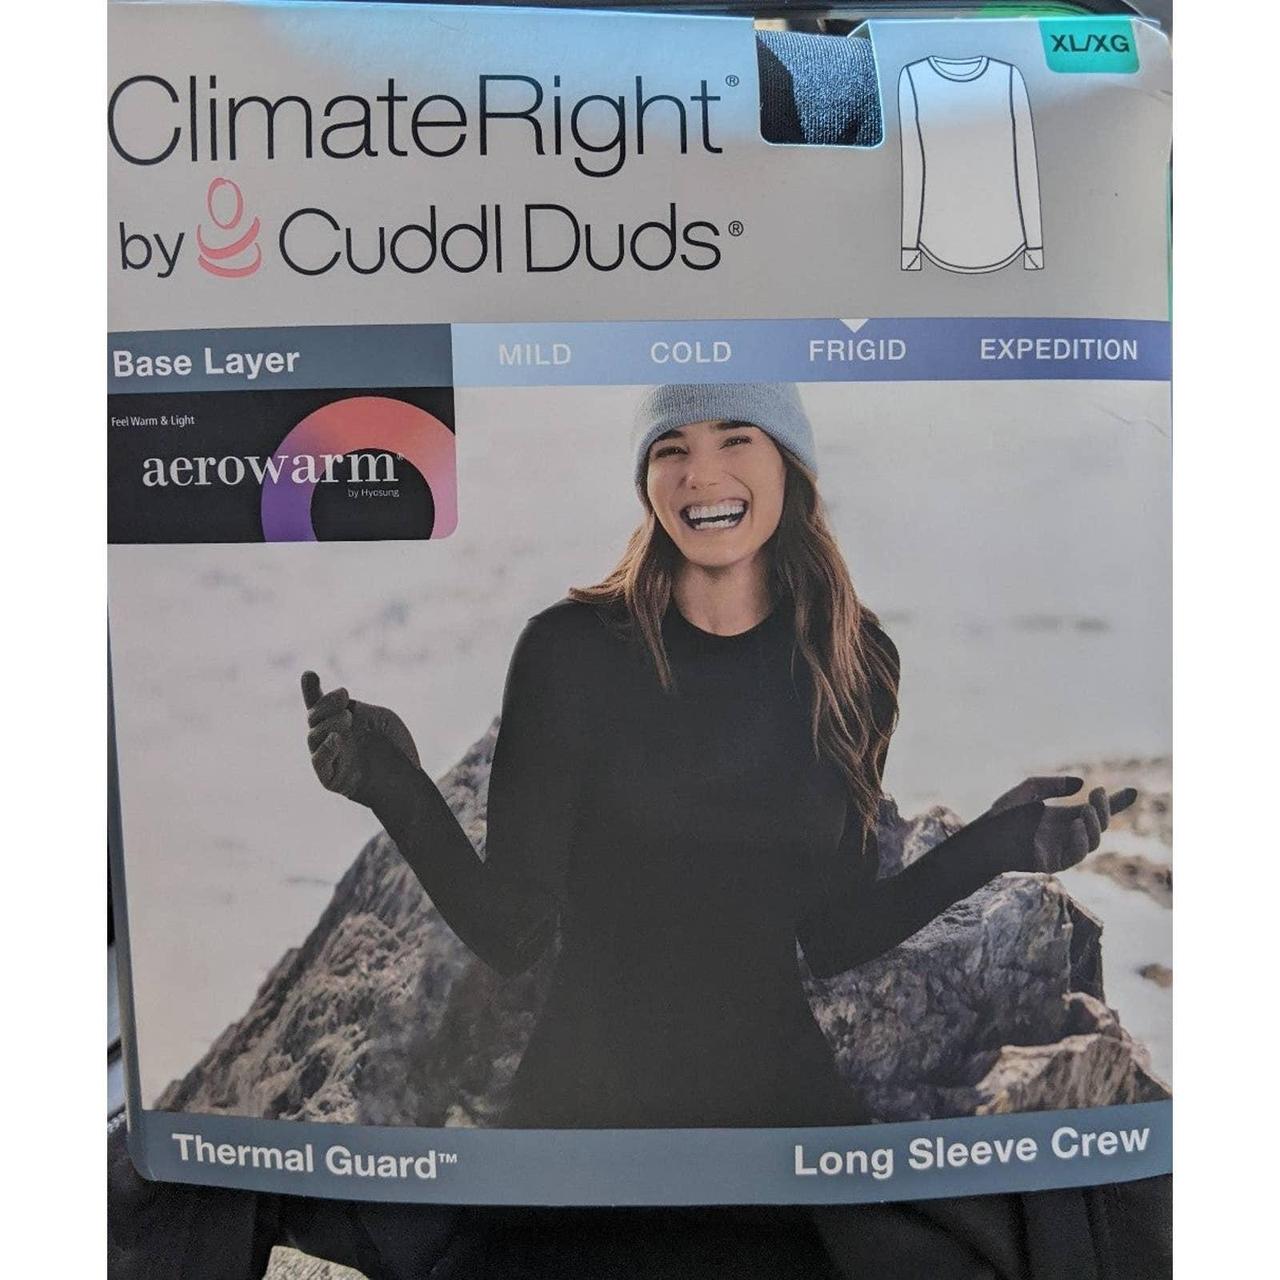 NWT ClimateRight Cuddl Duds Women's Thermal Guard - Depop